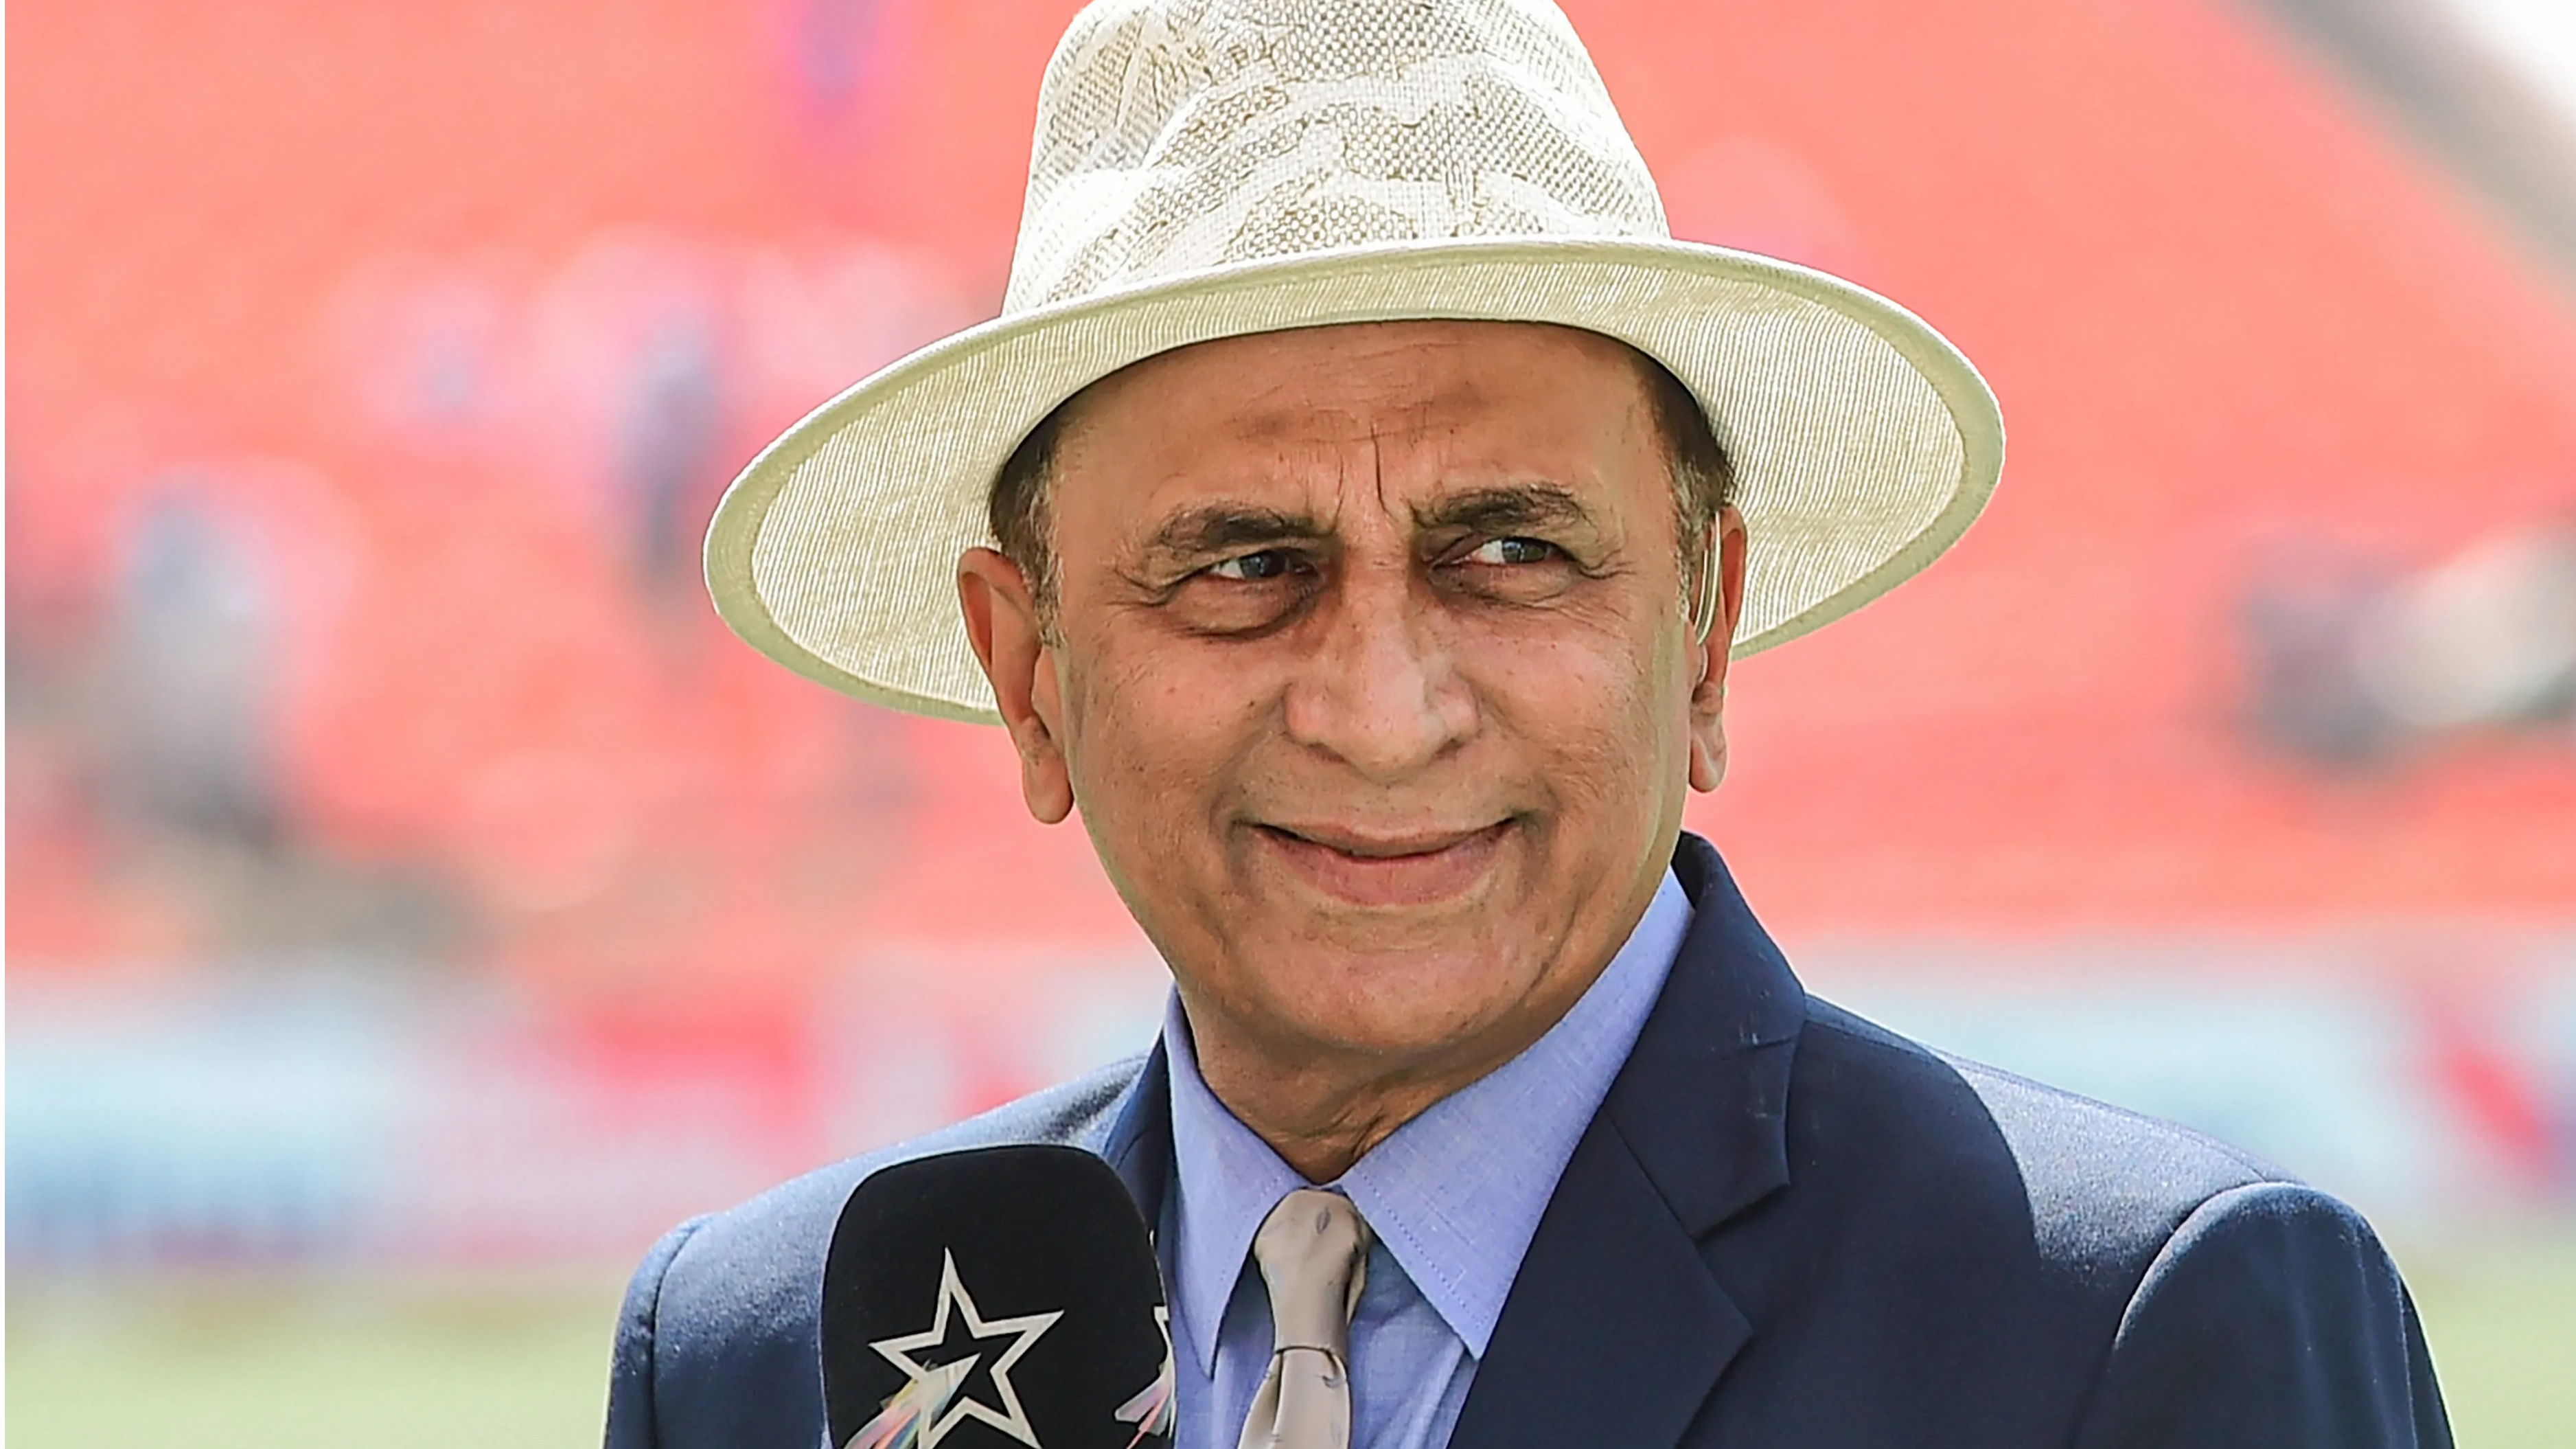 Indian cricket in safe hands with Dravid’s experience, work ethic: Gavaskar